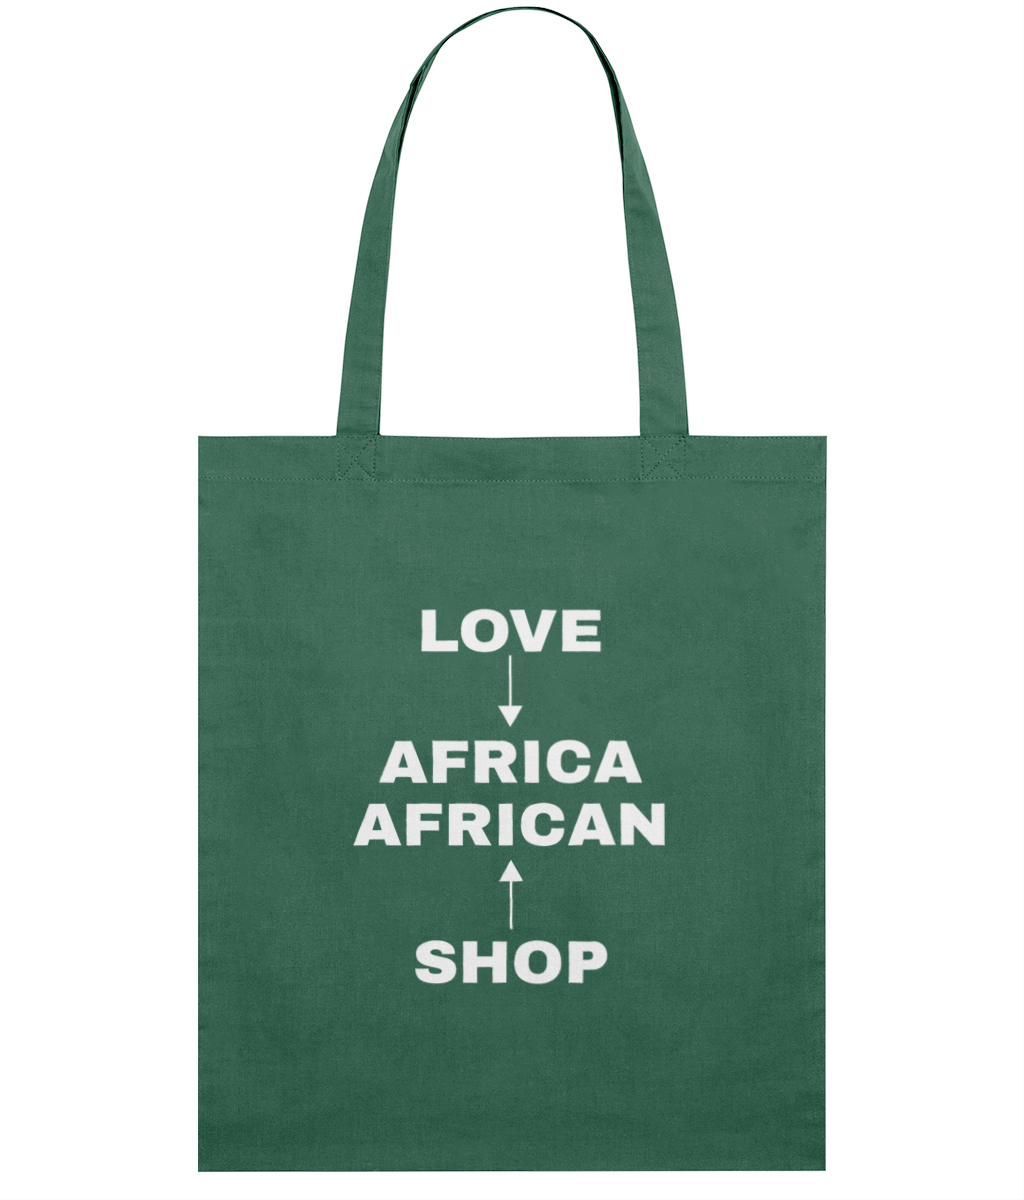 Love Africa Shop African Tote Bag